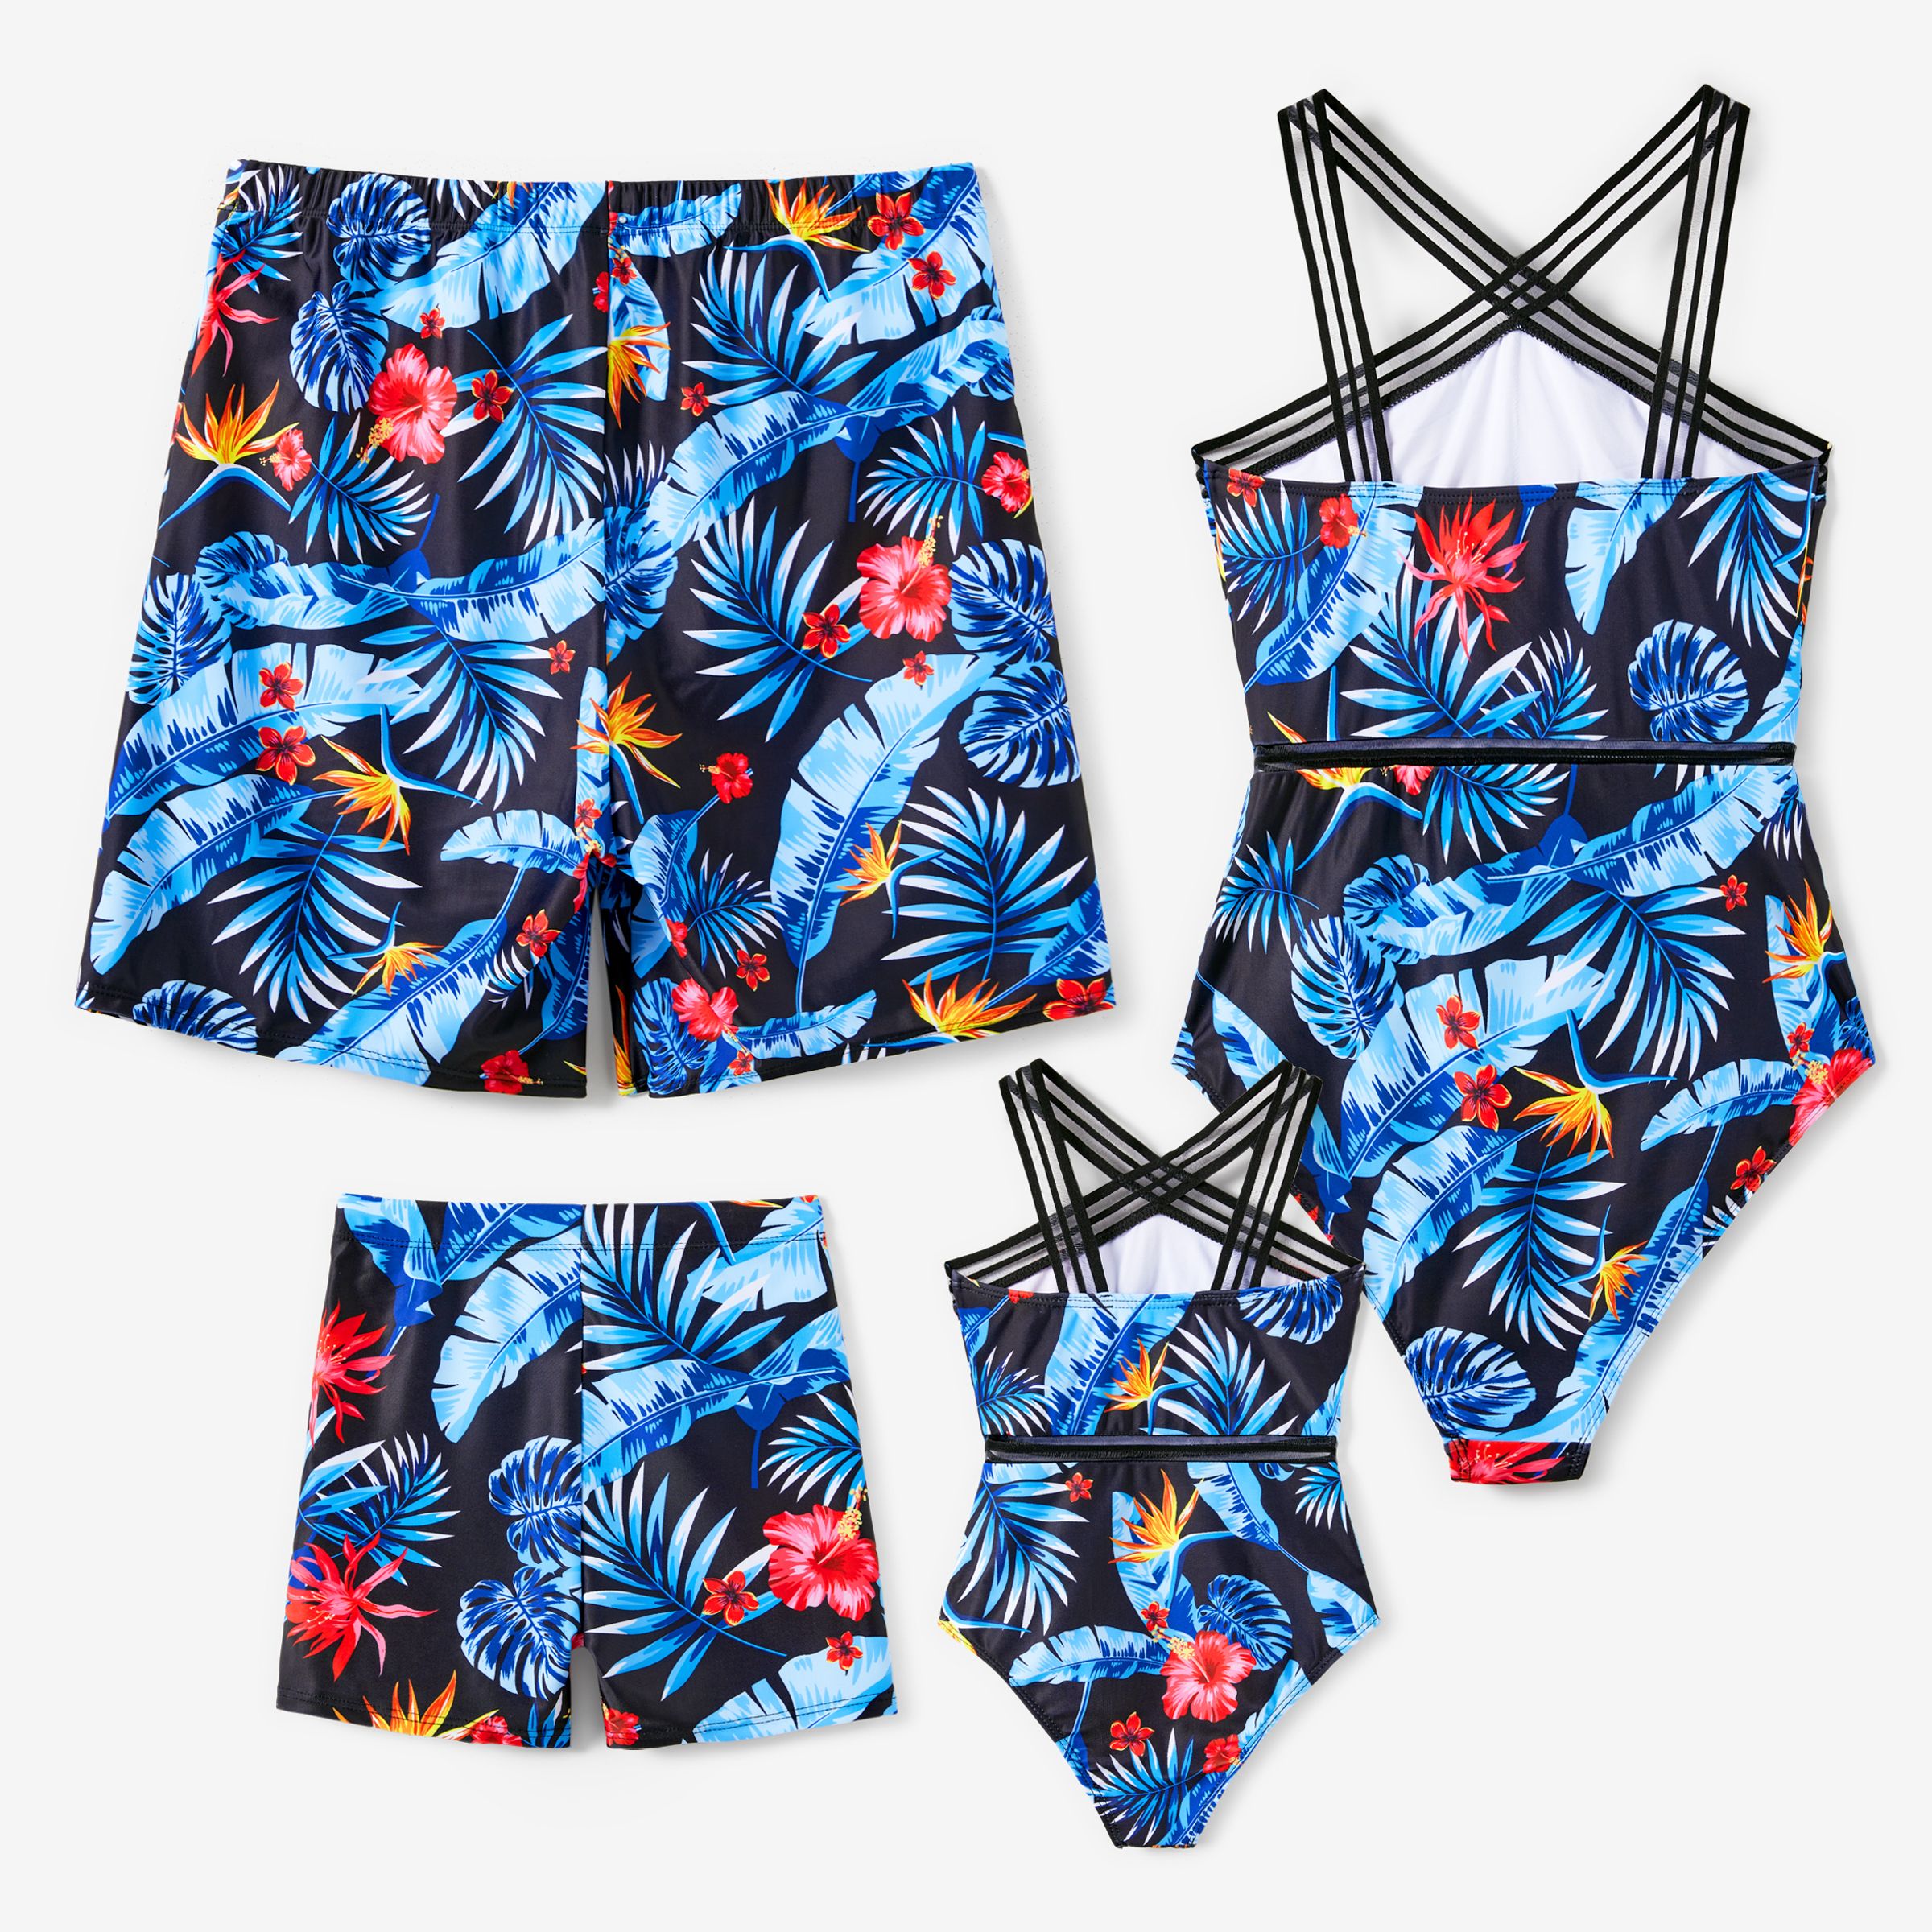 Family Matching Floral Drawstring Swim Trunks or Mesh Cross Strap One-Piece Swimsuit